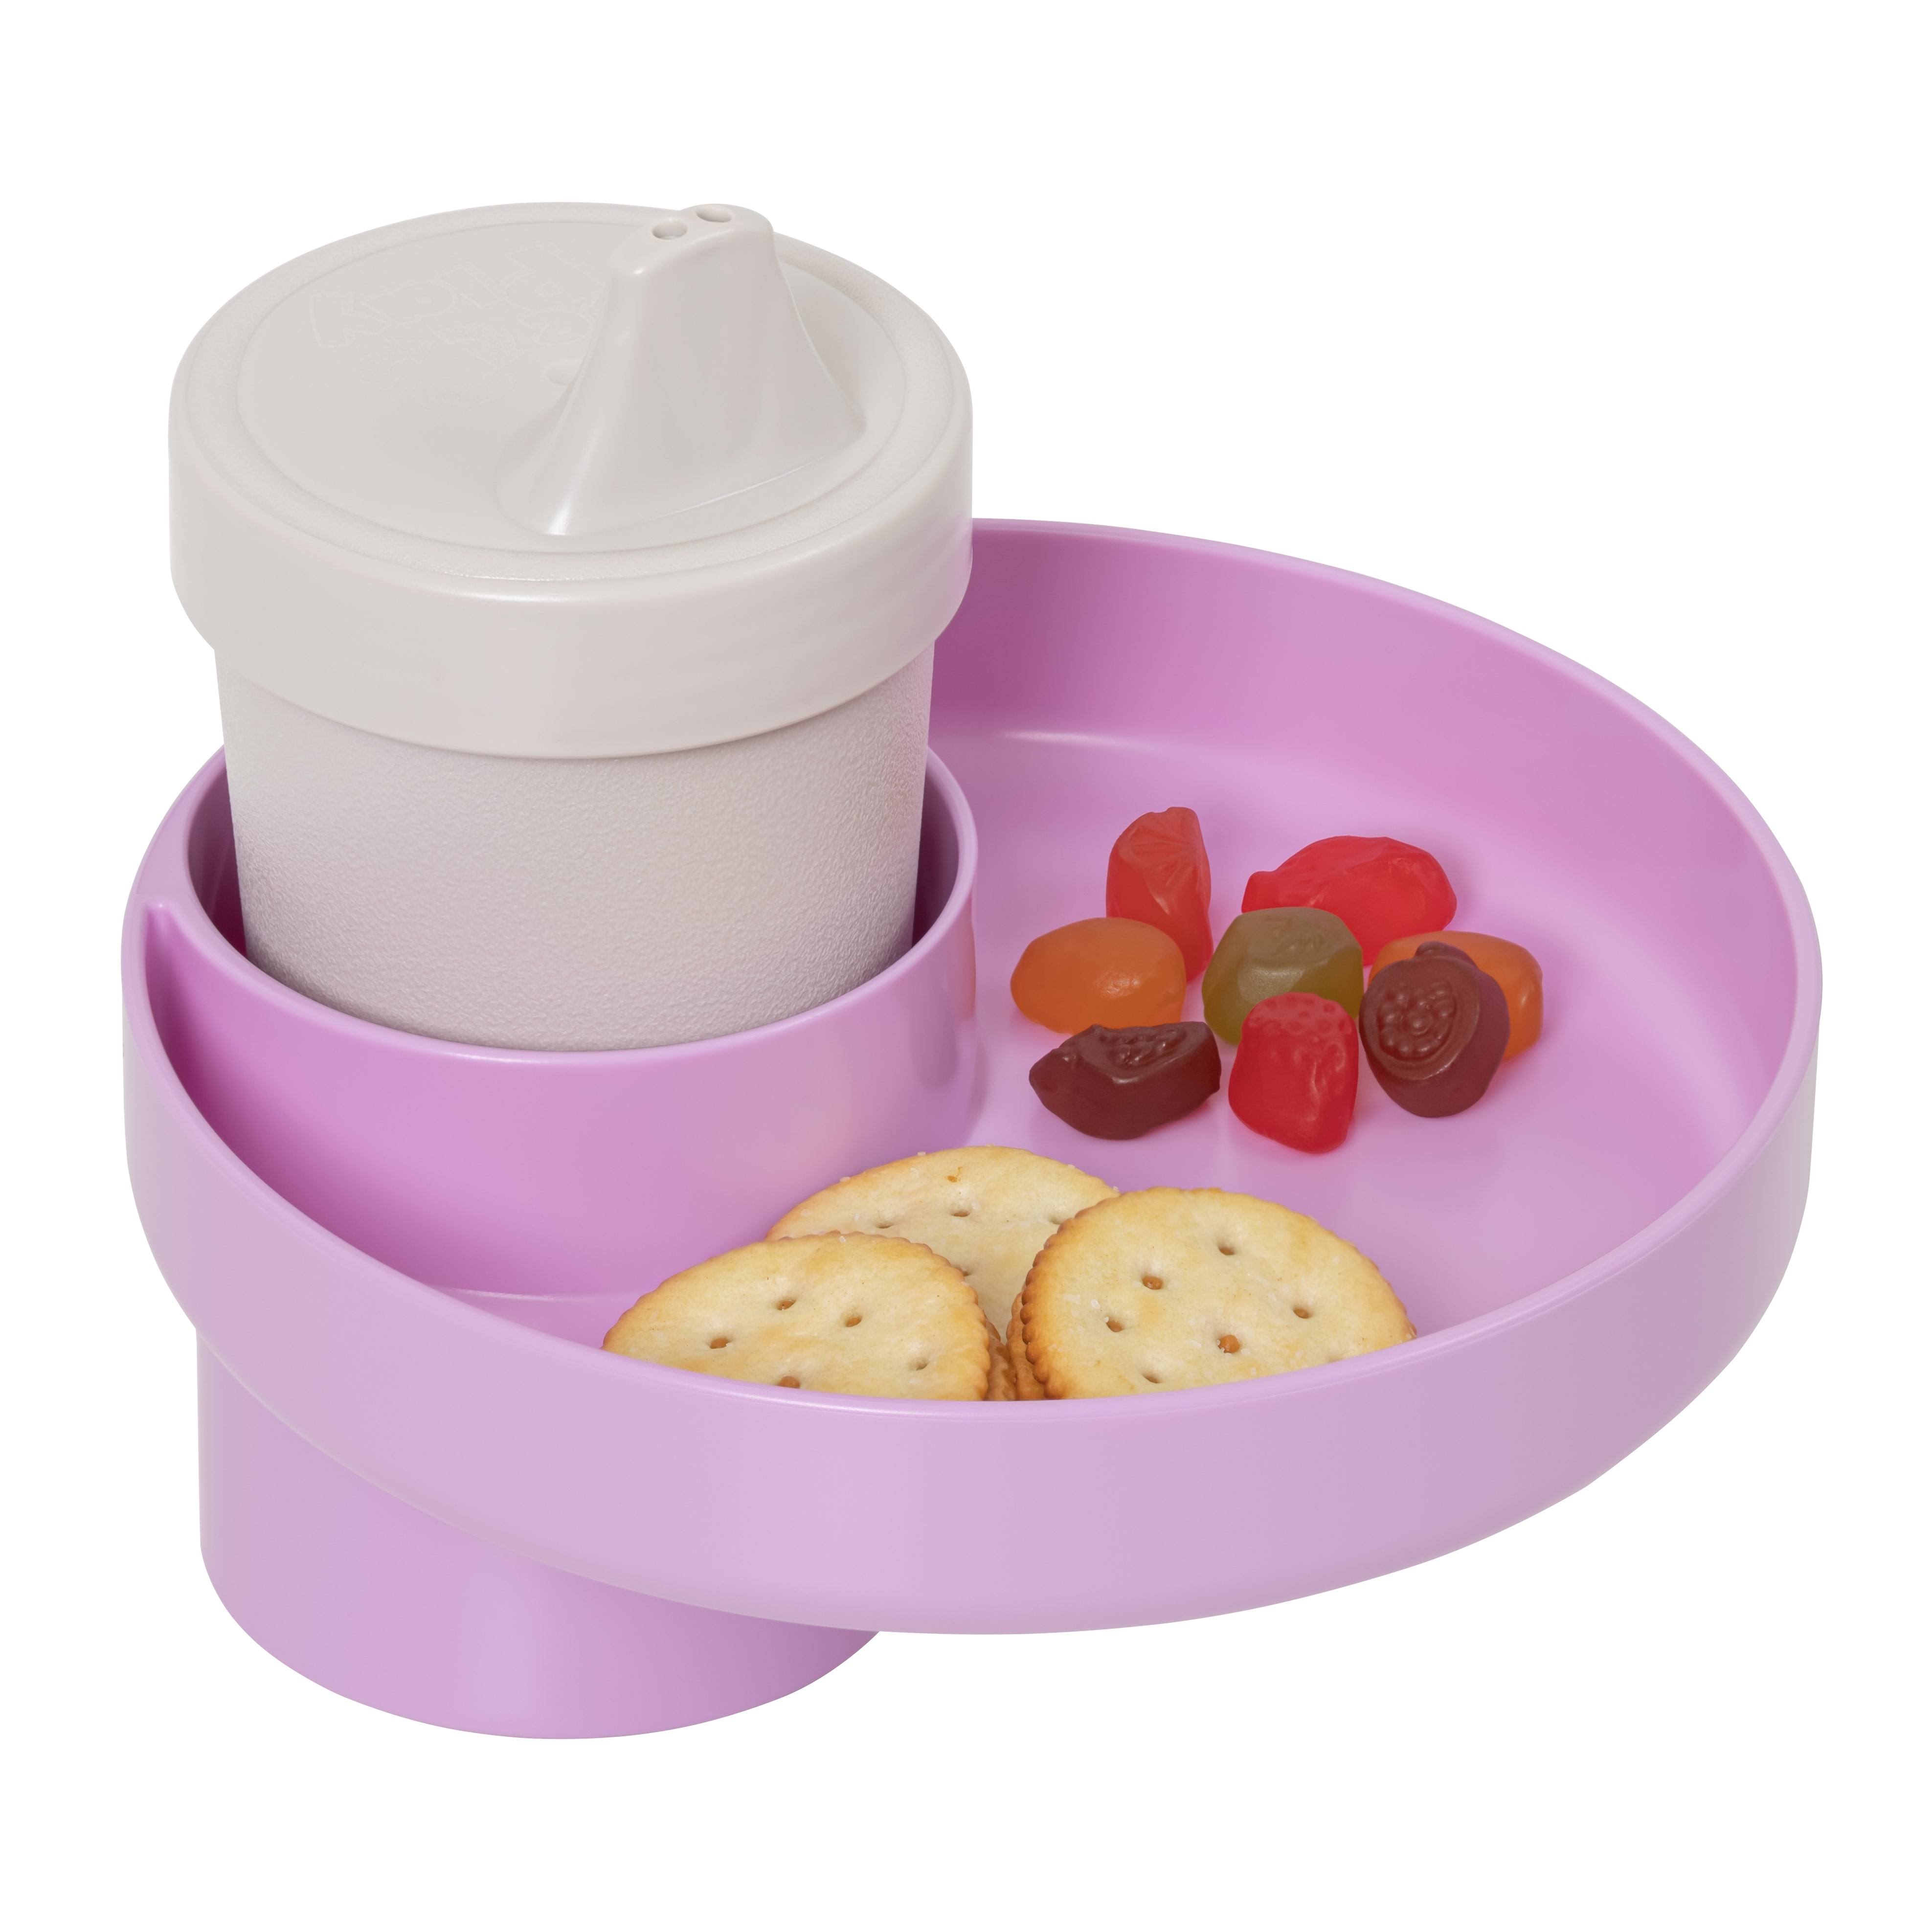 Travel Tray Lavender My Travel Tray Cup Holder Extender One-Size